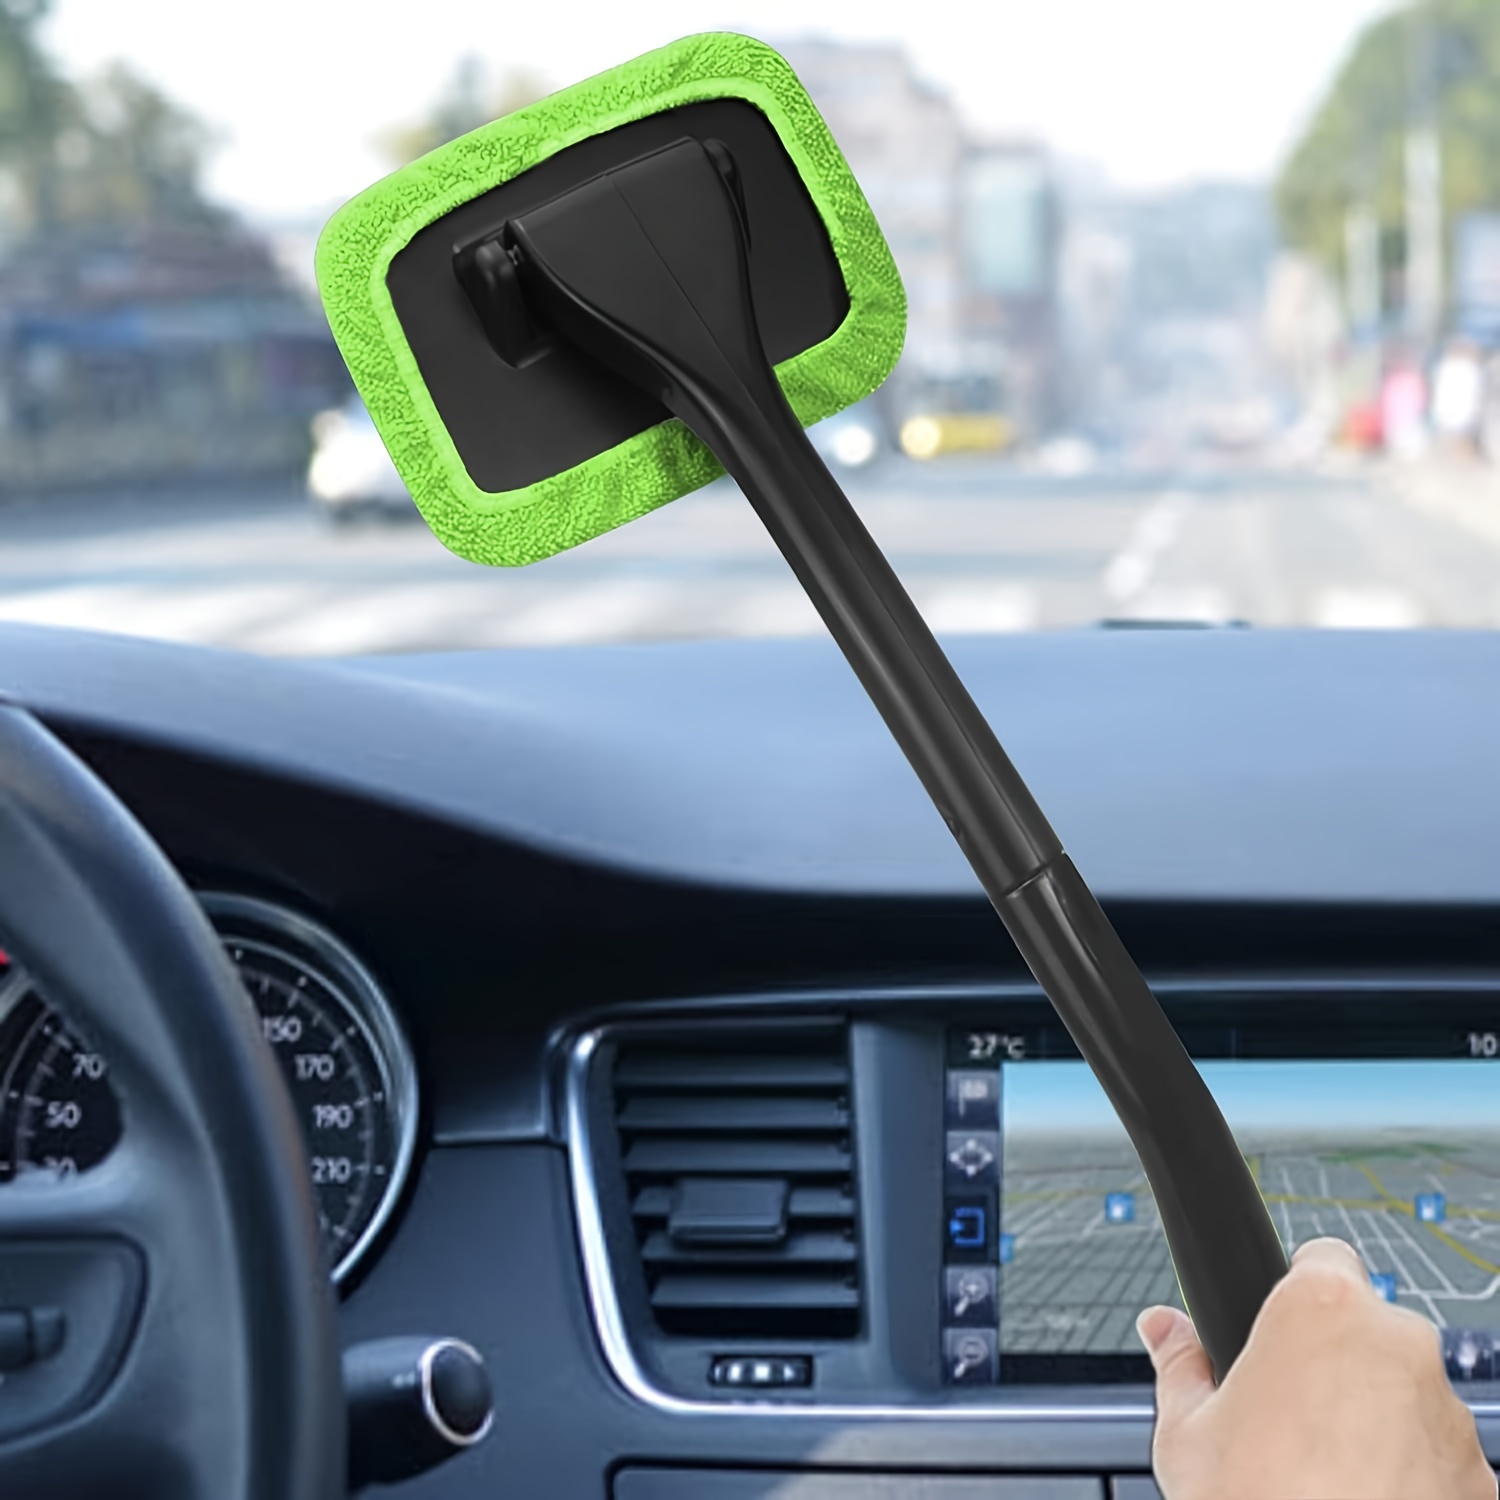  XINDELL Windshield Cleaning Tool - Microfiber Cloth Car Window  Cleanser Brush - Detachable Handle, Auto Glass Wiper, Interior Accessories,  Car Cleaning Kit : Automotive